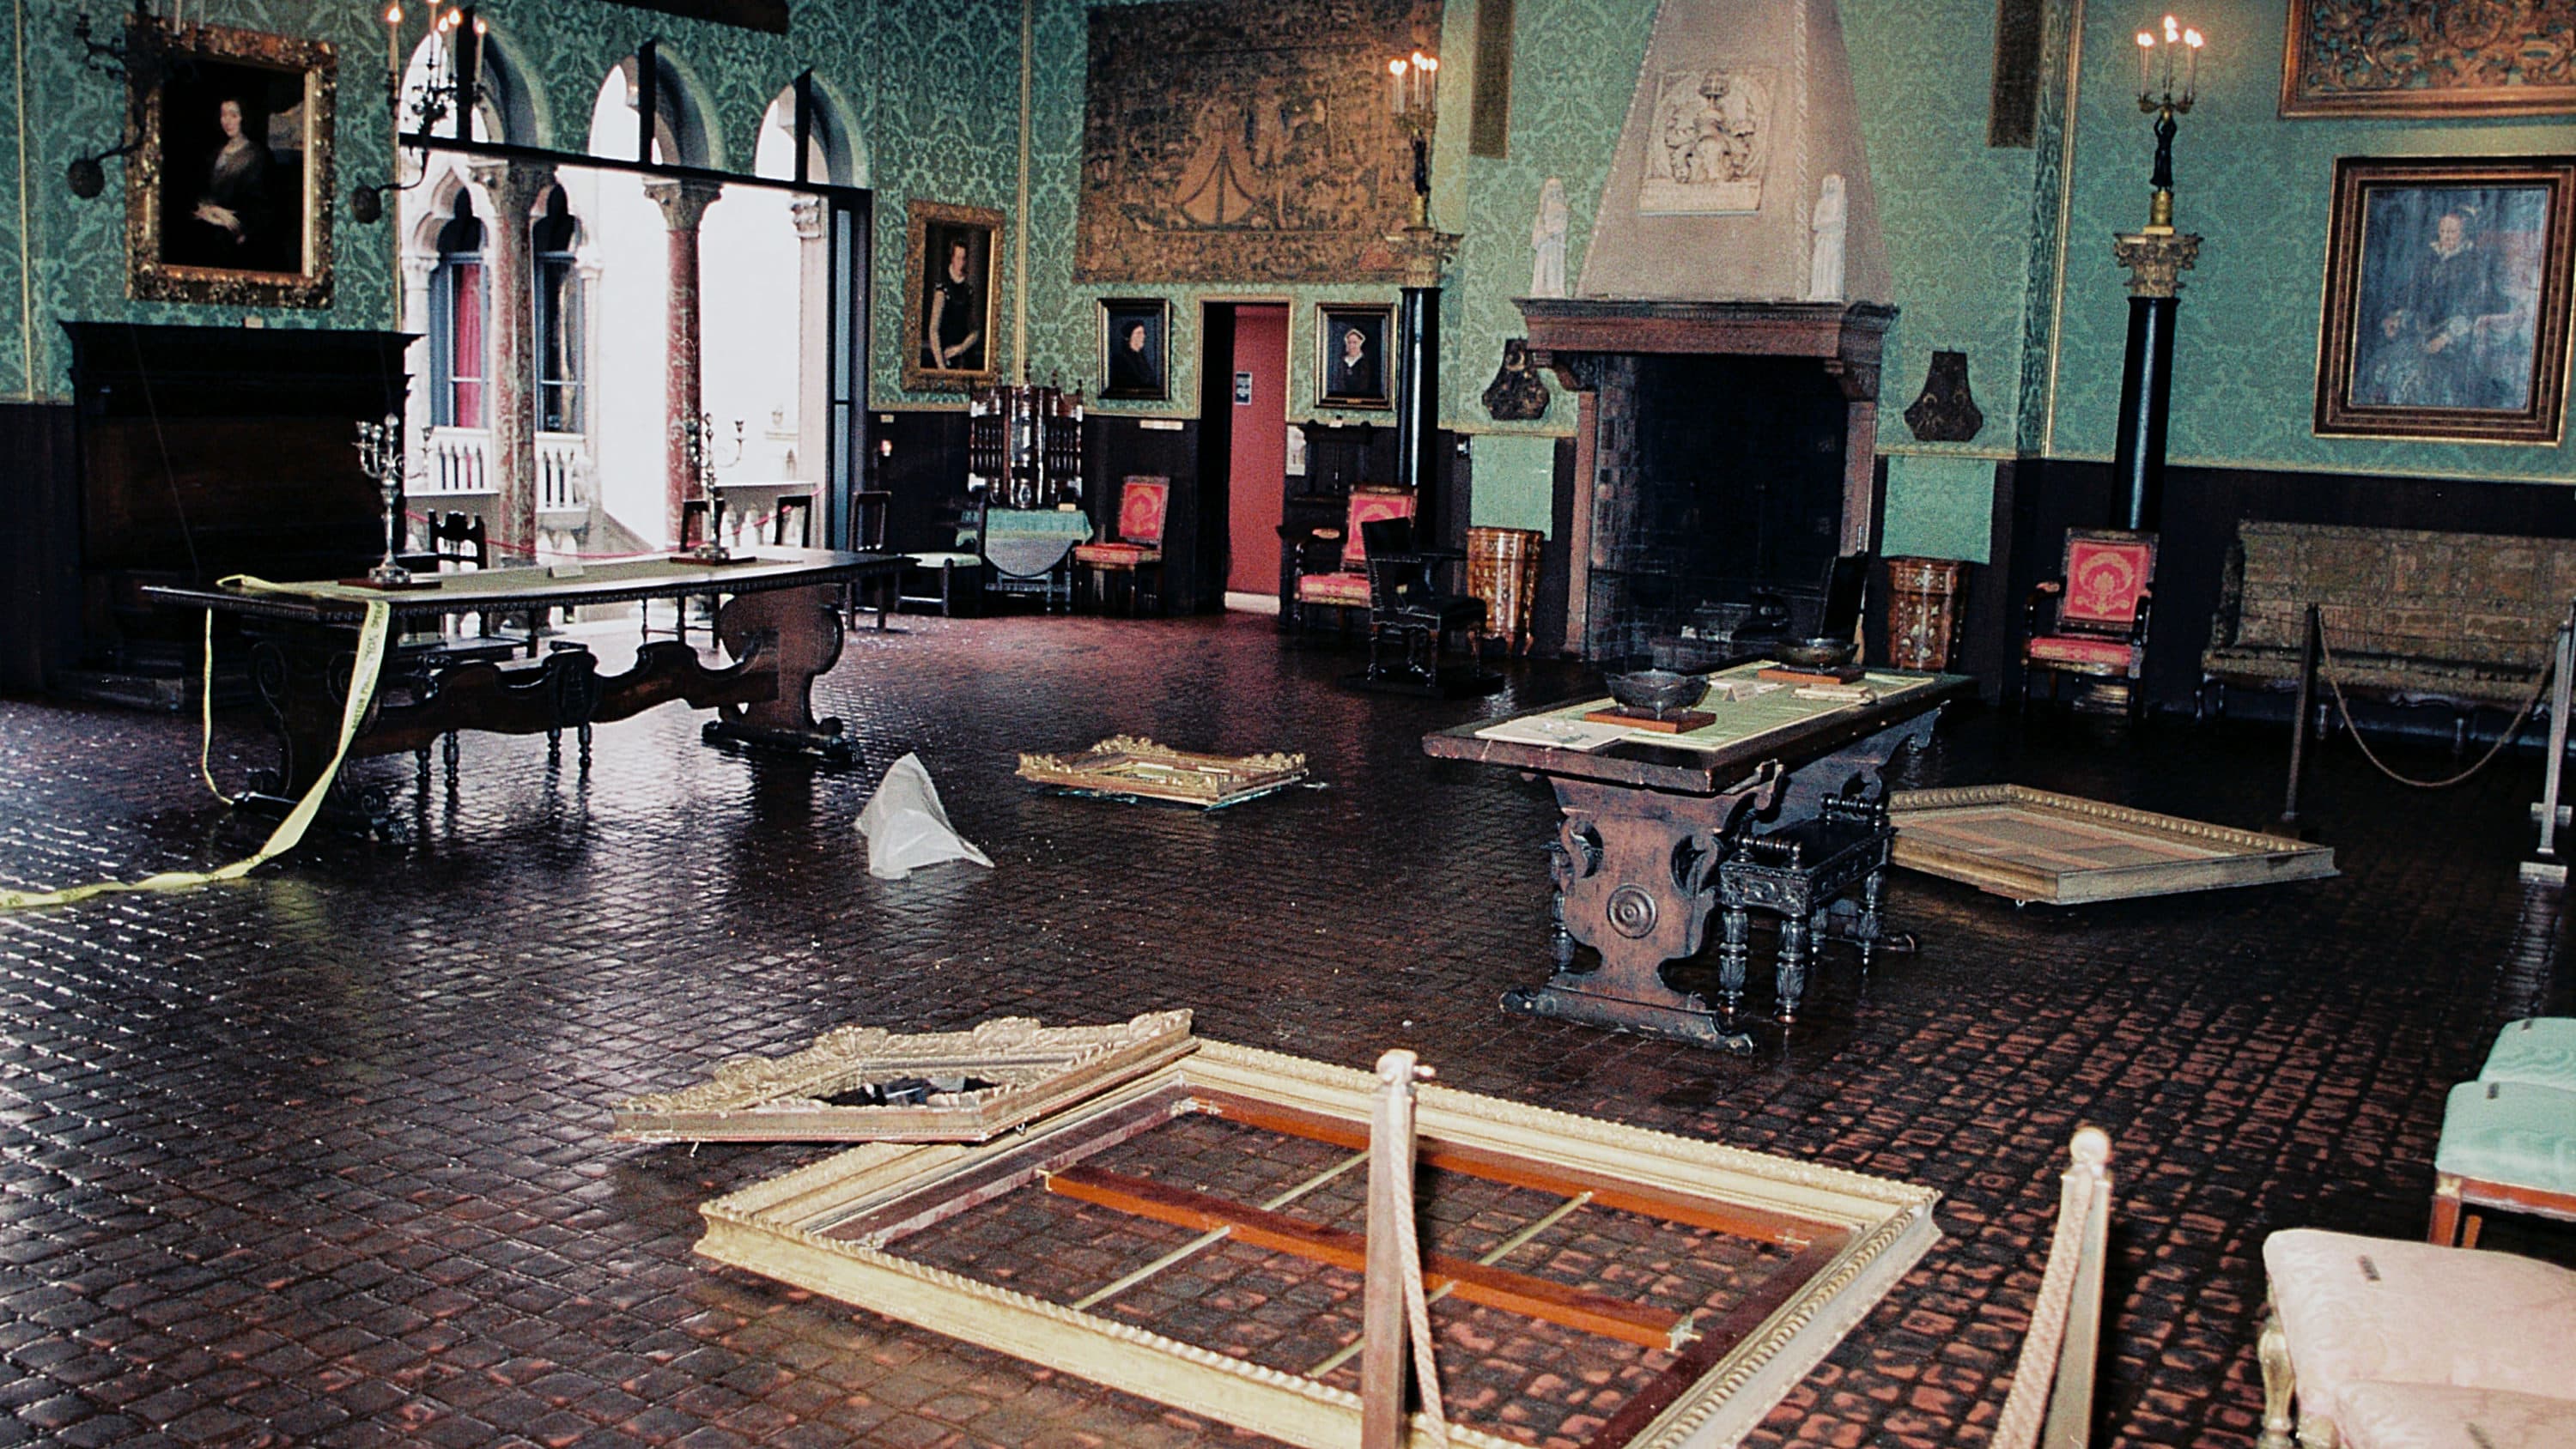 Inside the Isabella Stewart Gardner Museum after the robbery, as seen on "This Is a Robbery: The World's Biggest Art Heist." (Courtesy of Netflix)